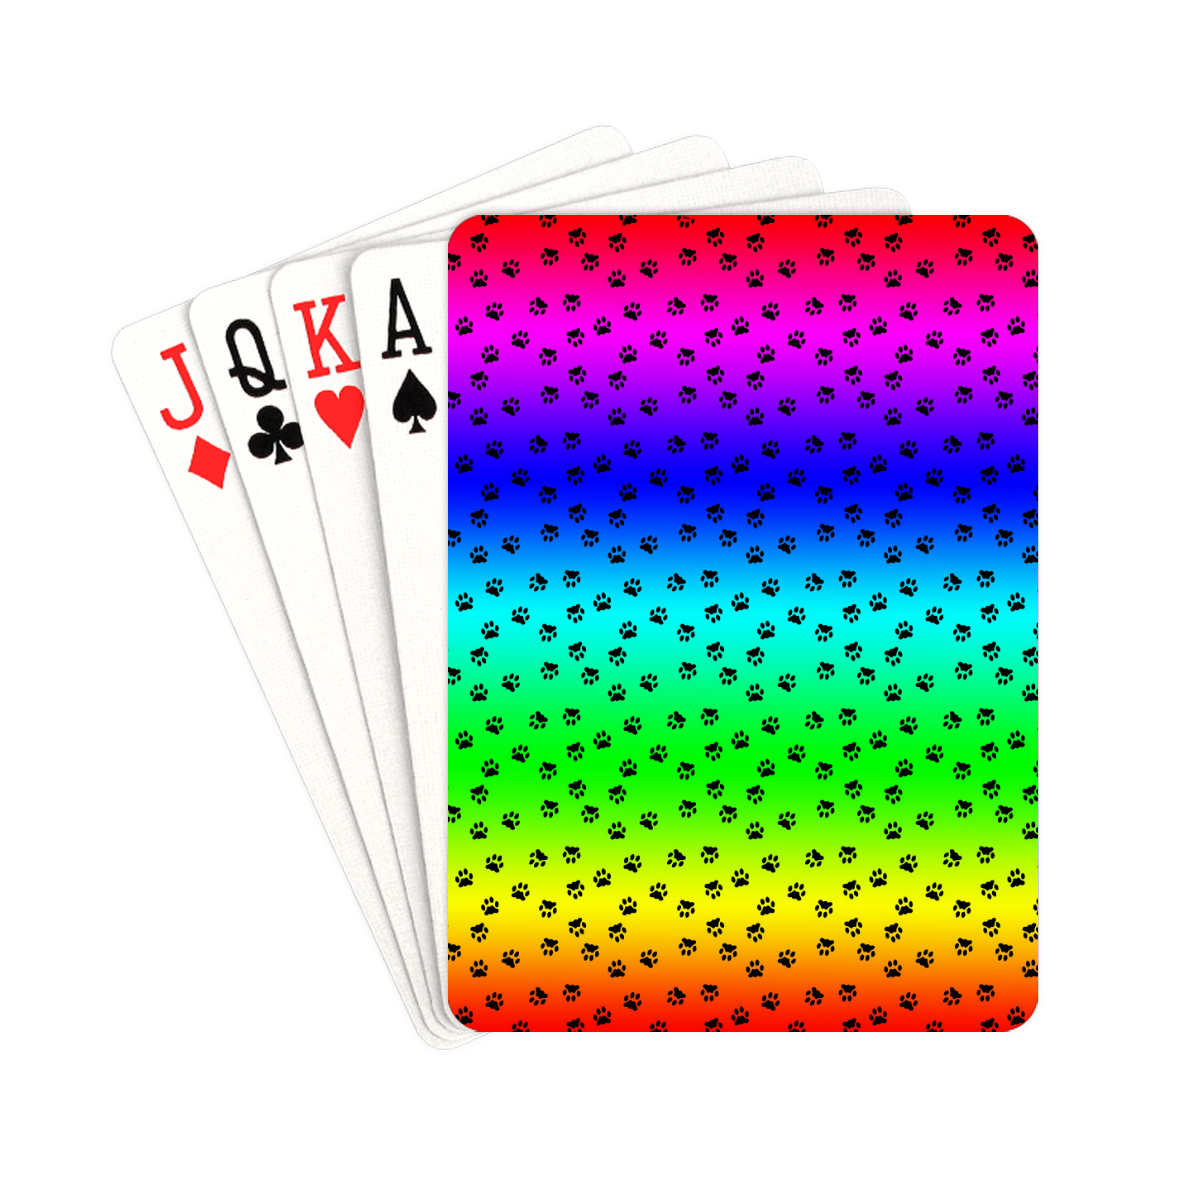 rainbow with black paws Playing Cards 2.5"x3.5"